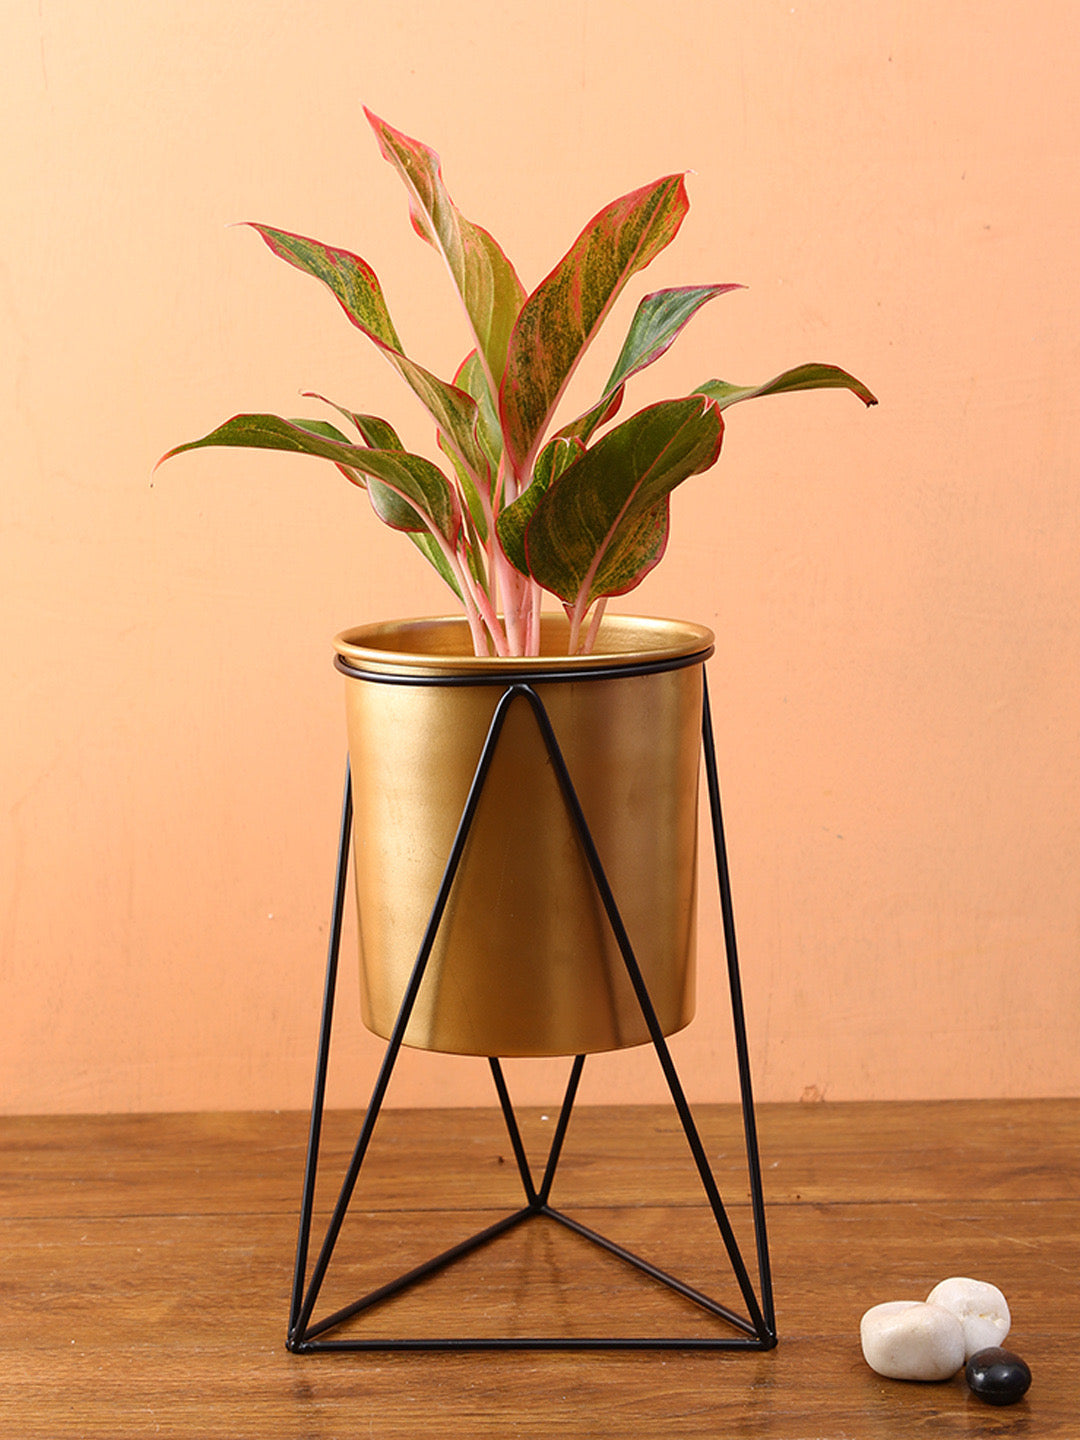 Metal Planter with Triangular Stand - Default Title (CHM2102)